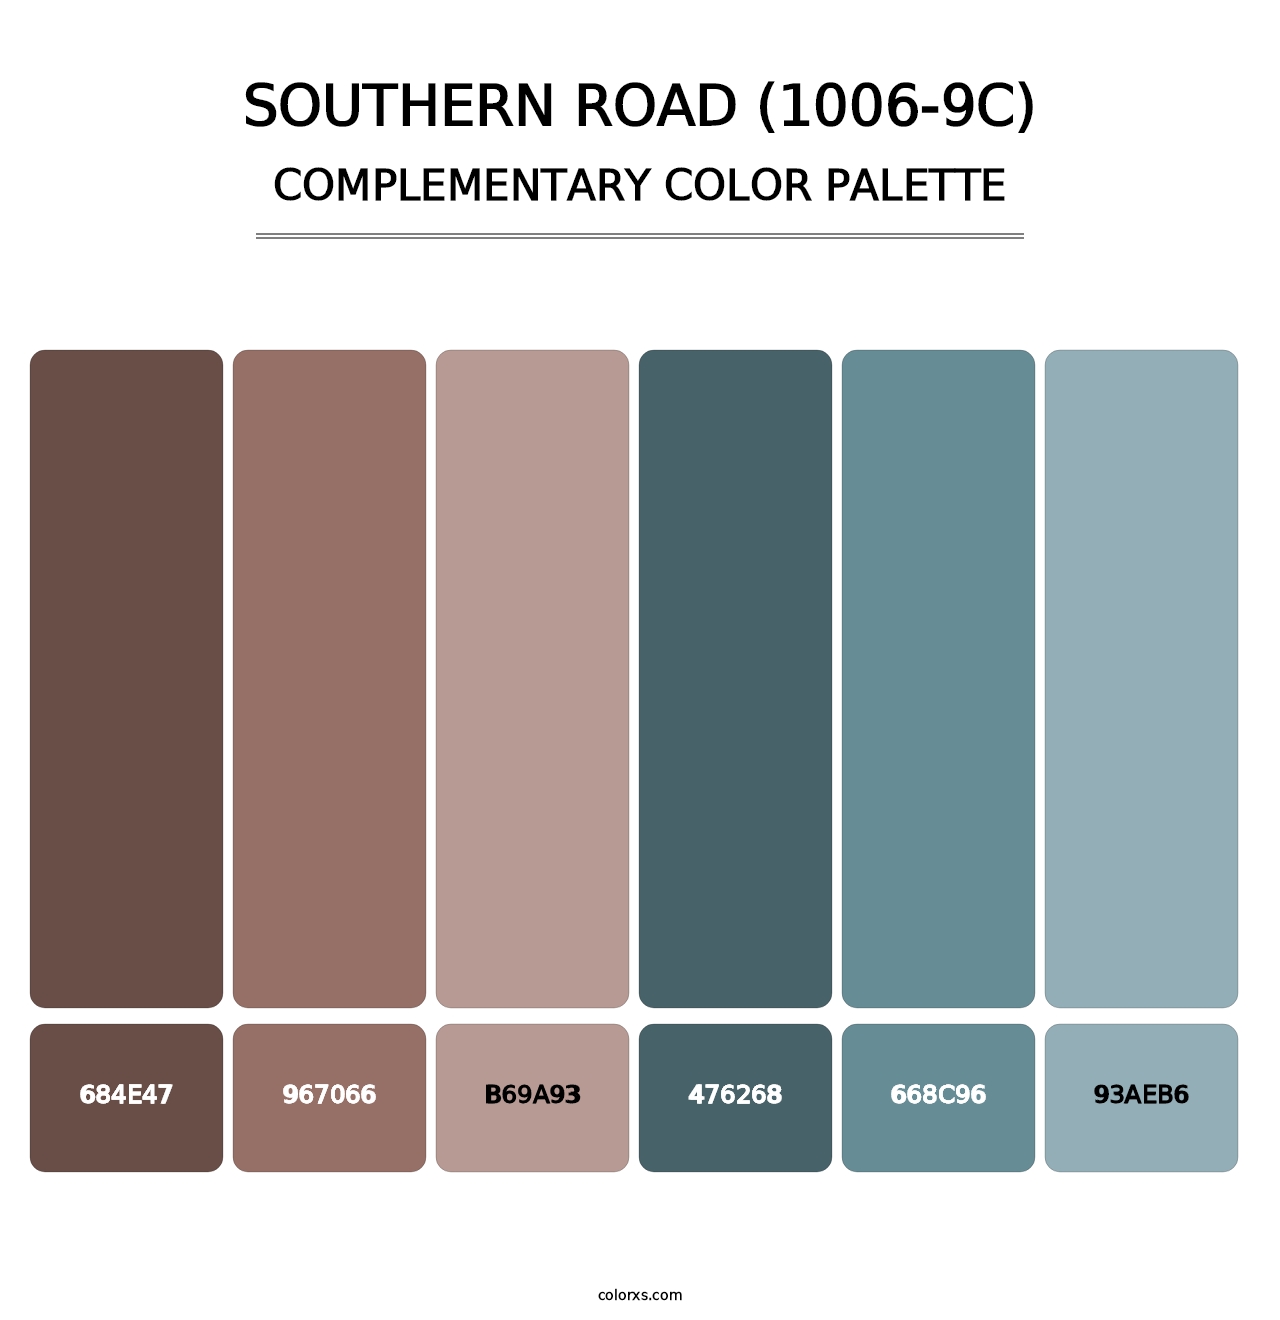 Southern Road (1006-9C) - Complementary Color Palette